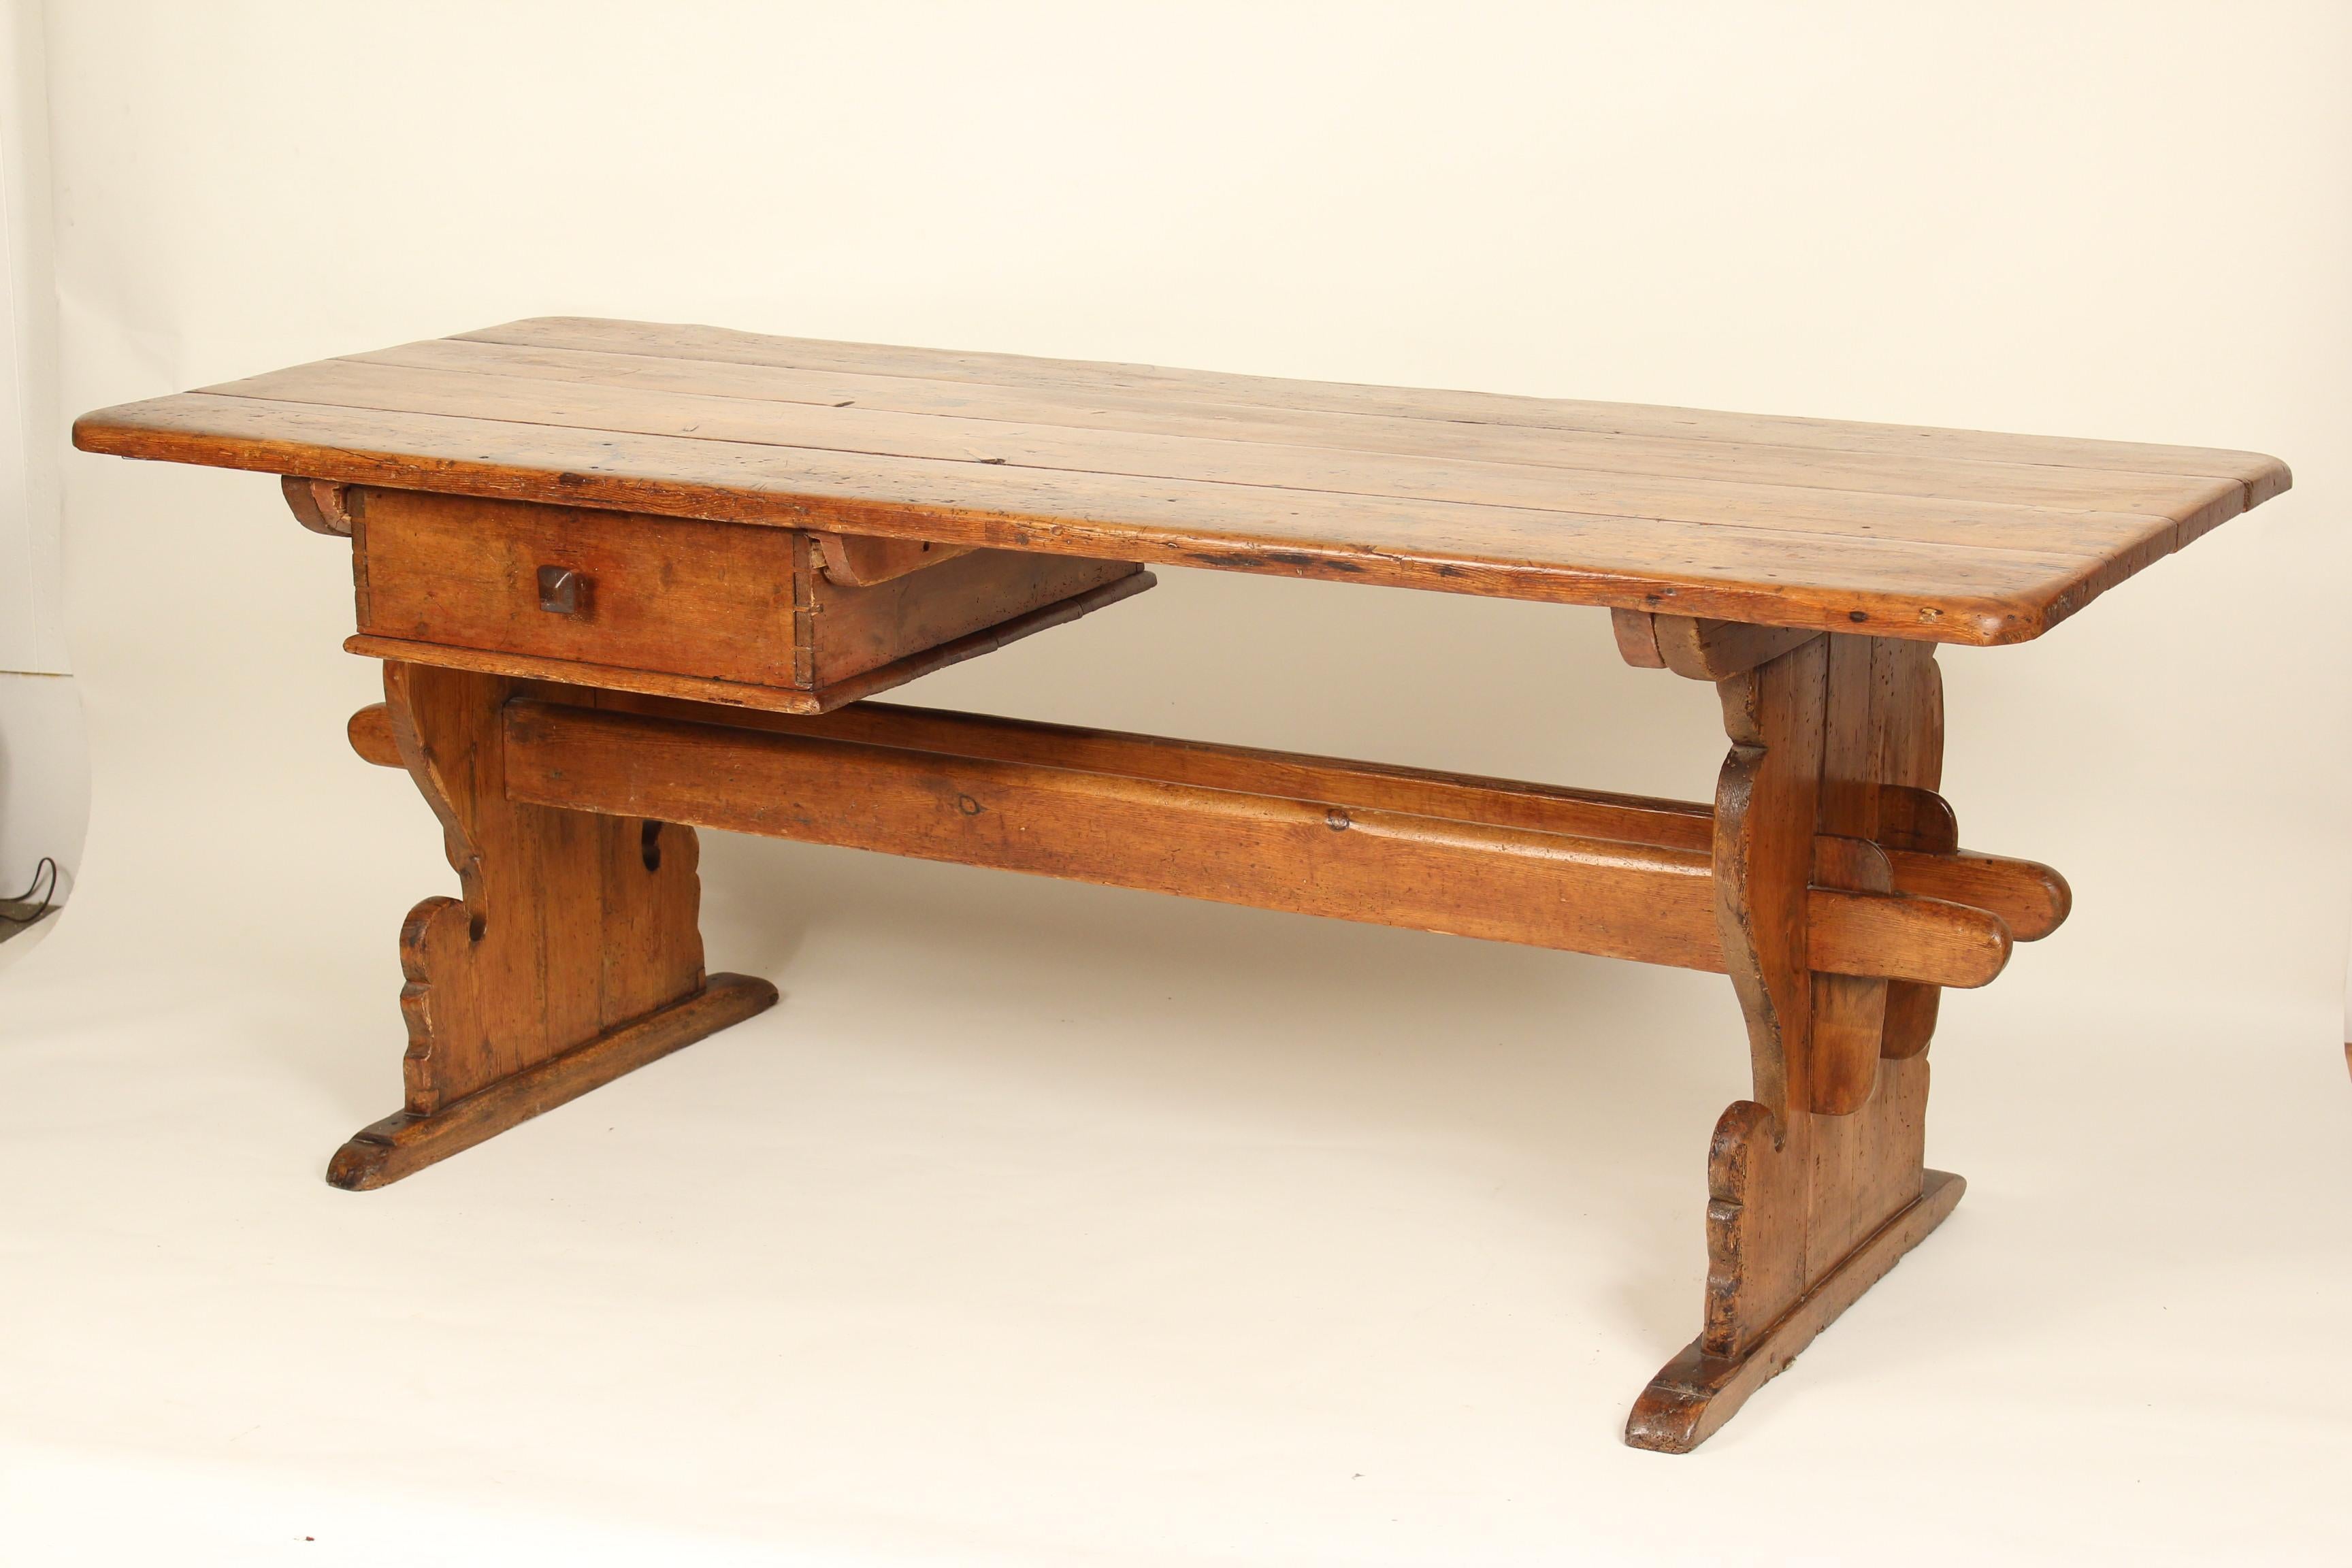 19th century Swedish pine trestle form dining room table. This table has an excellent old patina.